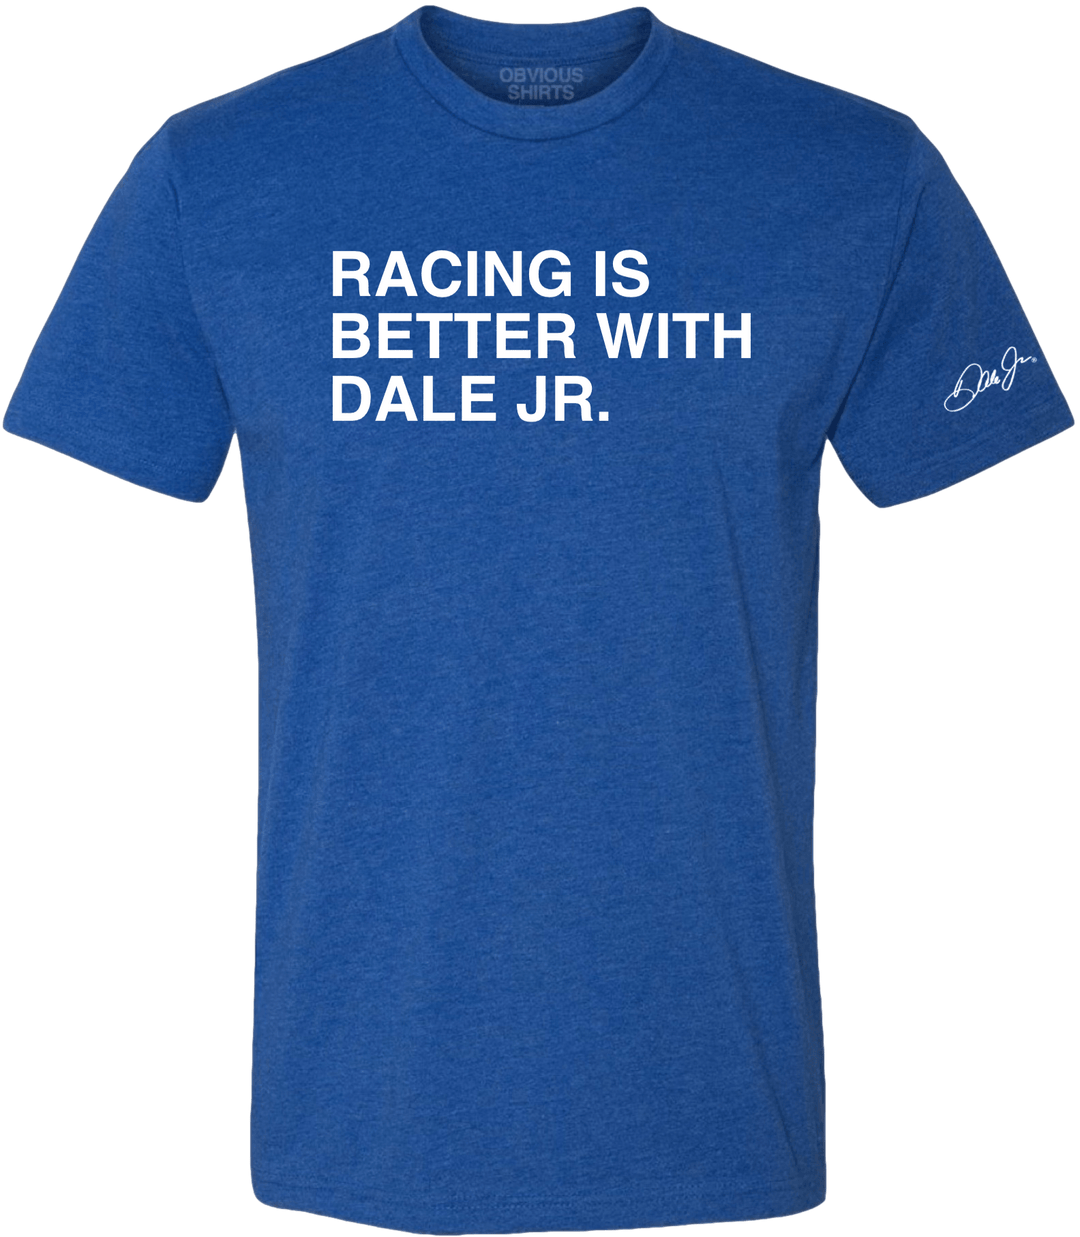 RACING IS BETTER WITH DALE JR. - OBVIOUS SHIRTS